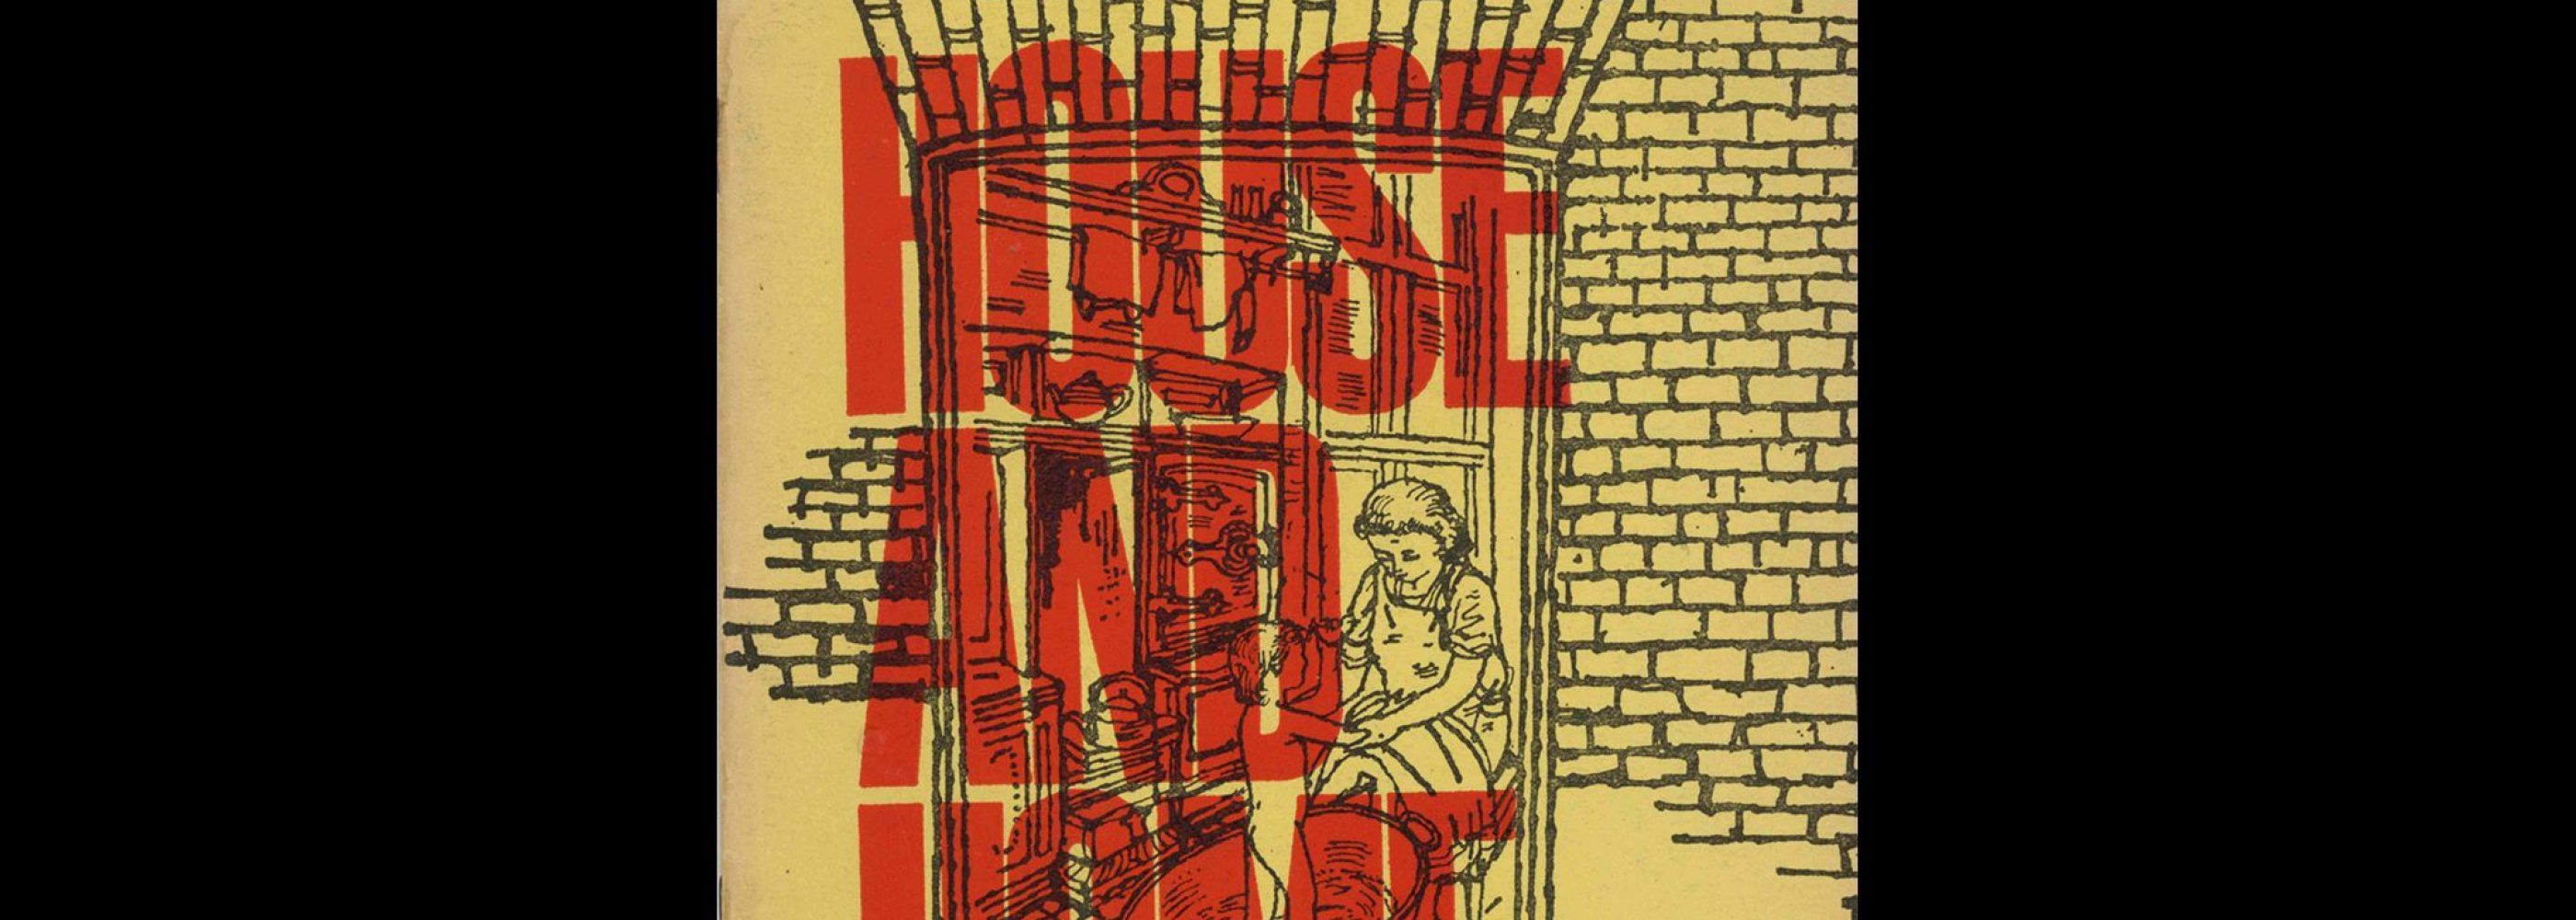 Anarchy 35, Freedom Press, January 1964. Cover illustration by M. Lindsay